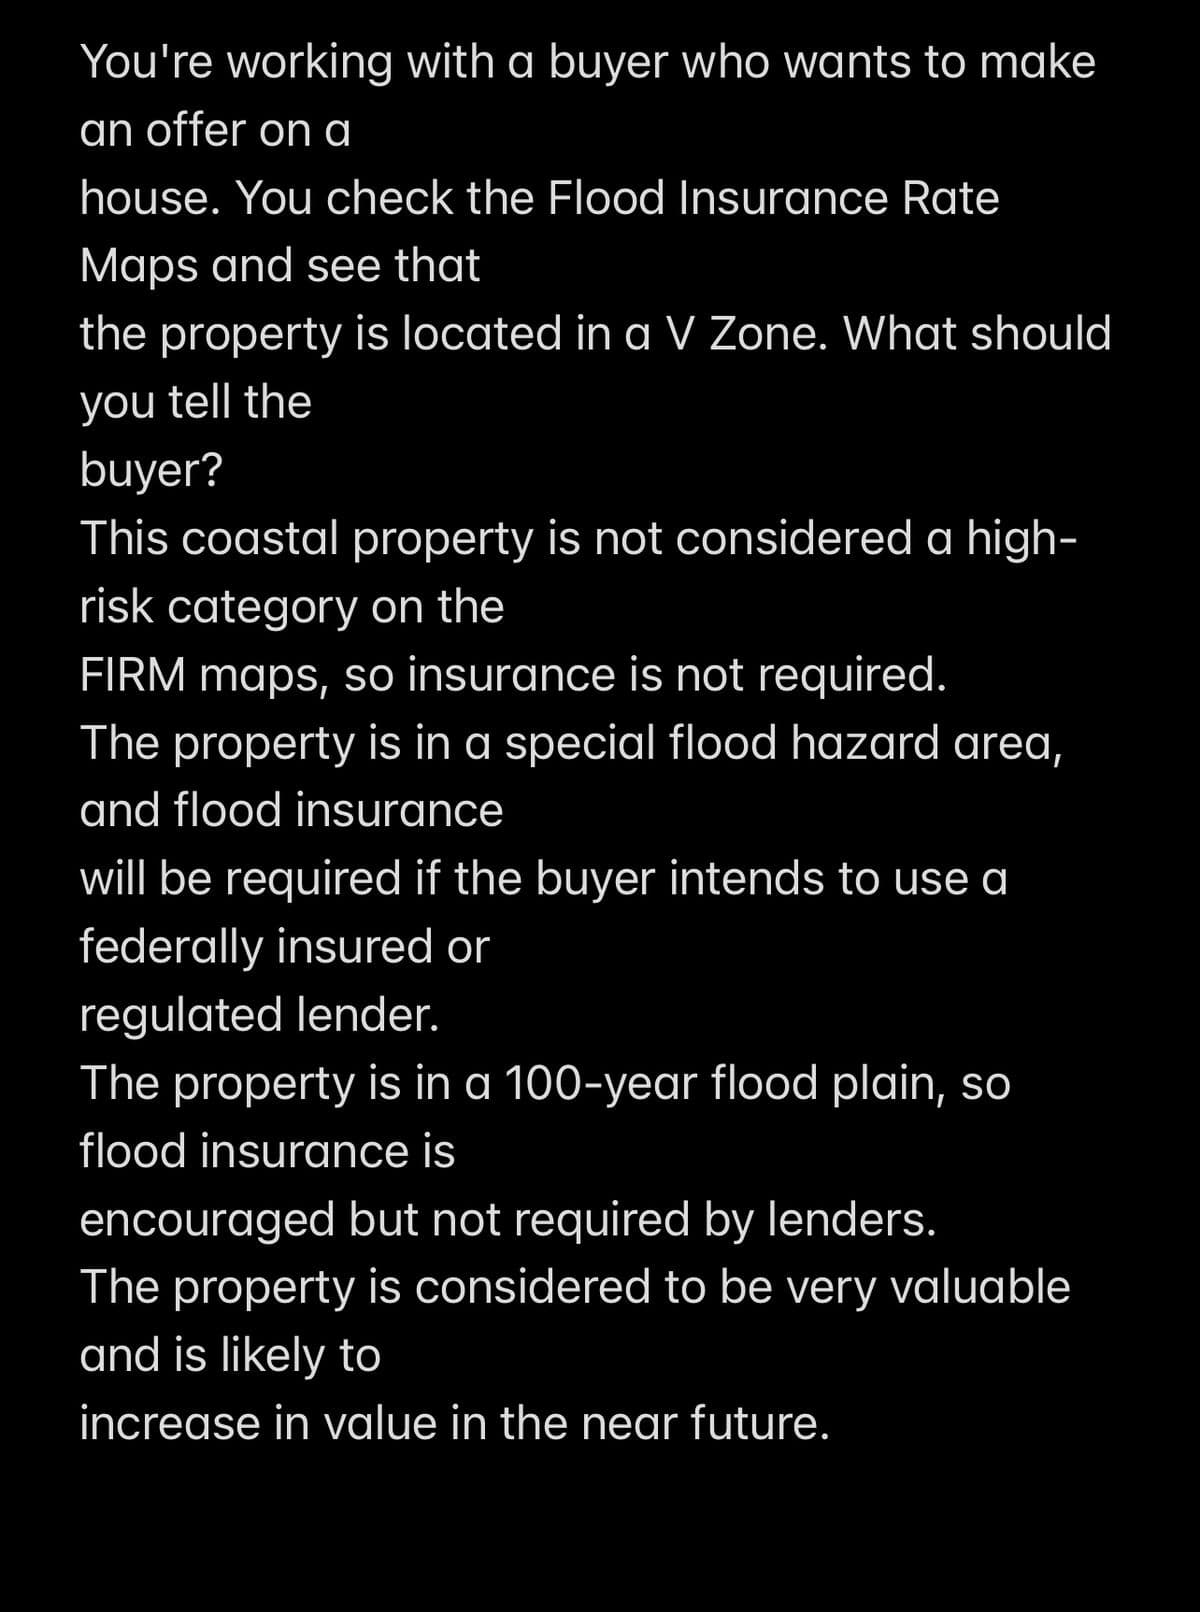 You're working with a buyer who wants to make
an offer on a
house. You check the Flood Insurance Rate
Maps and see that
the property is located in a V Zone. What should
you tell the
buyer?
This coastal property is not considered a high-
risk category on the
FIRM maps, so insurance is not required.
The property is in a special flood hazard area,
and flood insurance
will be required if the buyer intends to use a
federally insured or
regulated lender.
The property is in a 100-year flood plain, so
flood insurance is
encouraged but not required by lenders.
The property is considered to be very valuable
and is likely to
increase in value in the near future.